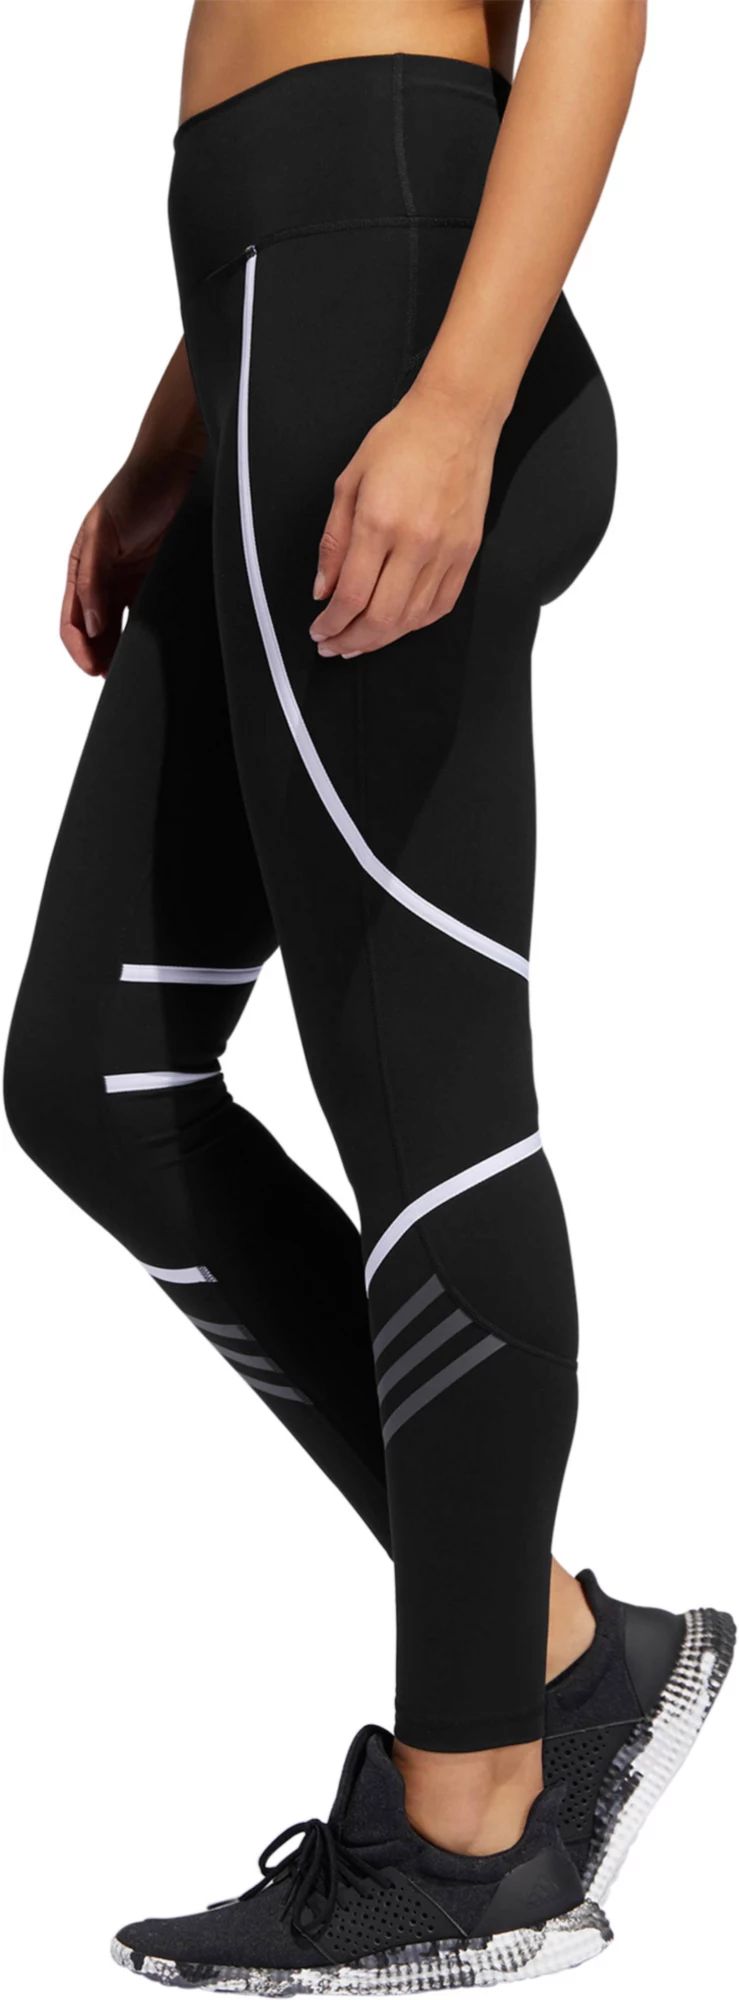 adidas Women's Believe This Elastic Wrap 7/8 Tights, Size: XS, Black | Dick's Sporting Goods